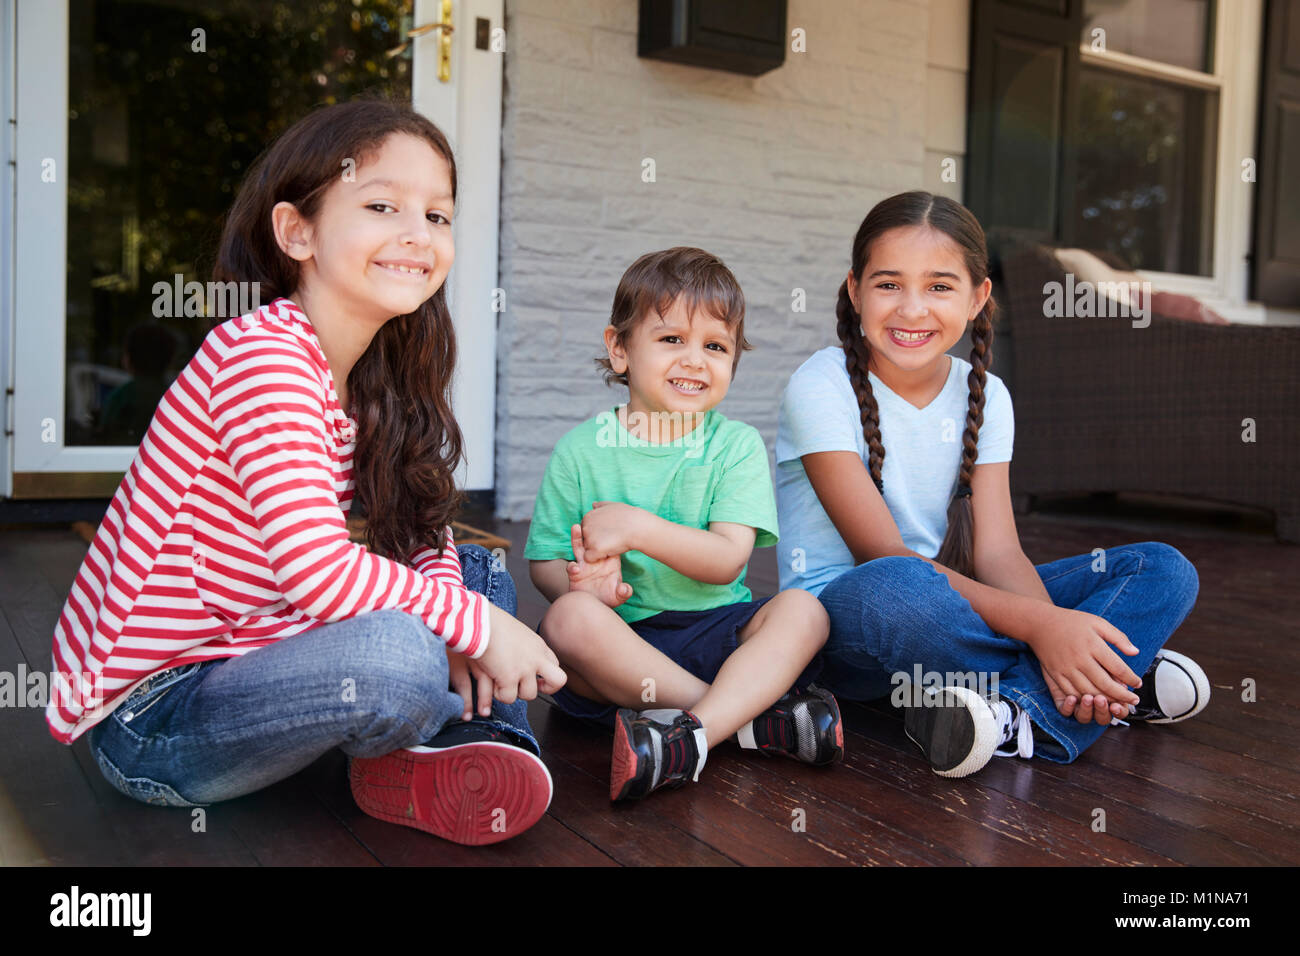 Portrait Of Children Sitting On Porch Of House Together Stock Photo